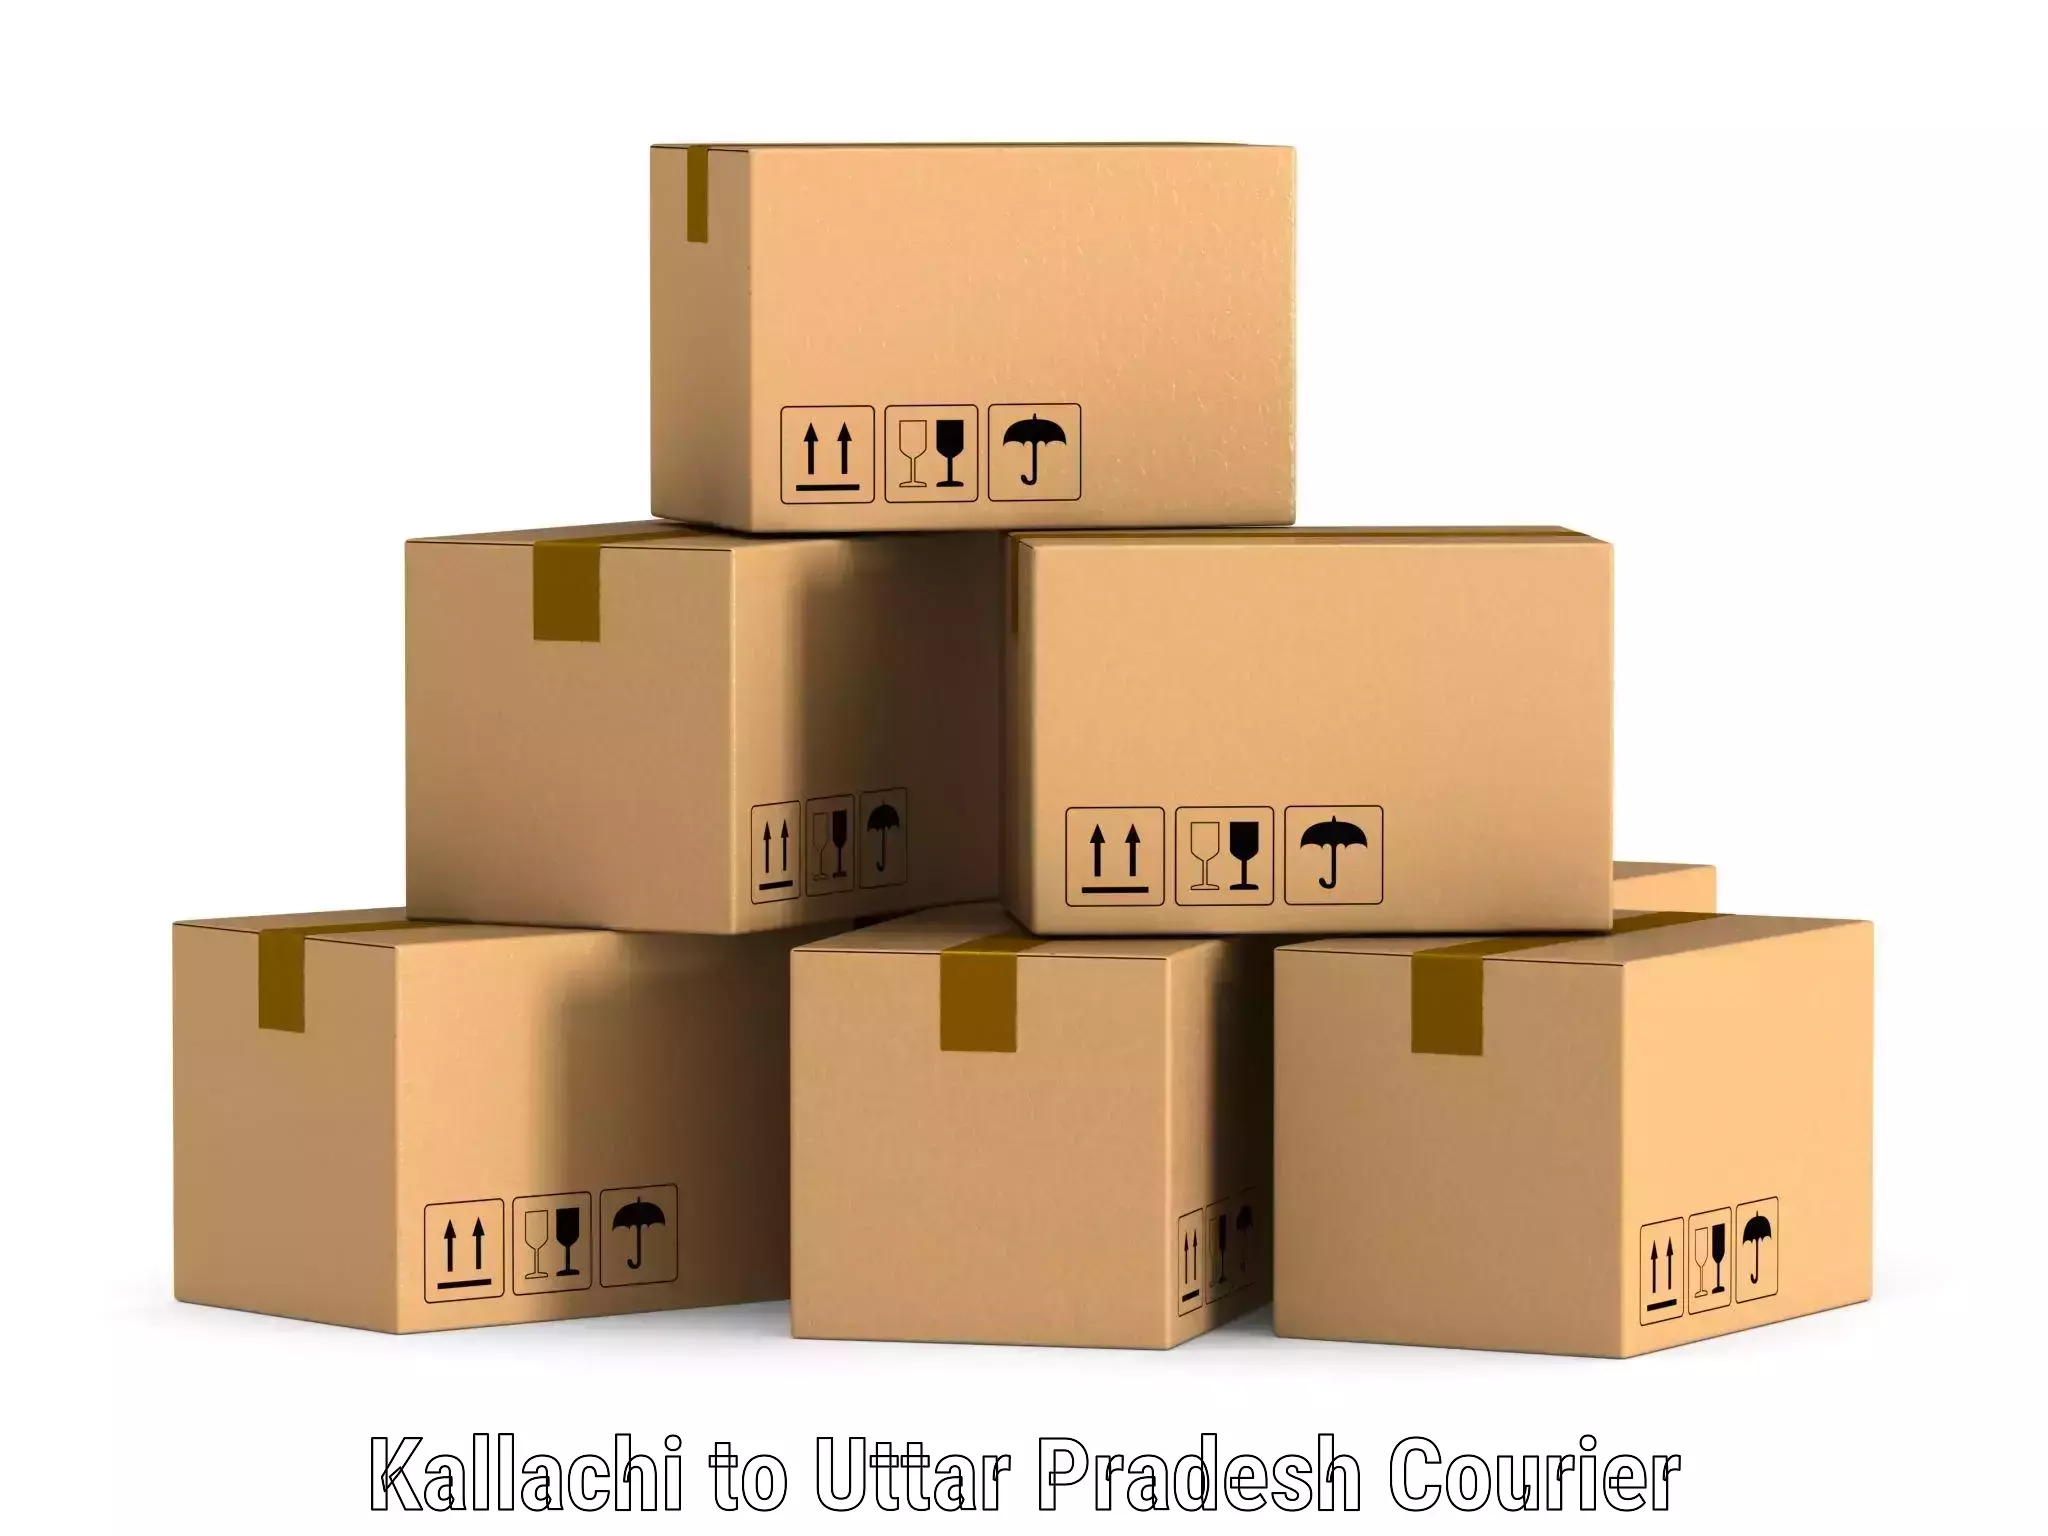 High-priority parcel service in Kallachi to Bareilly